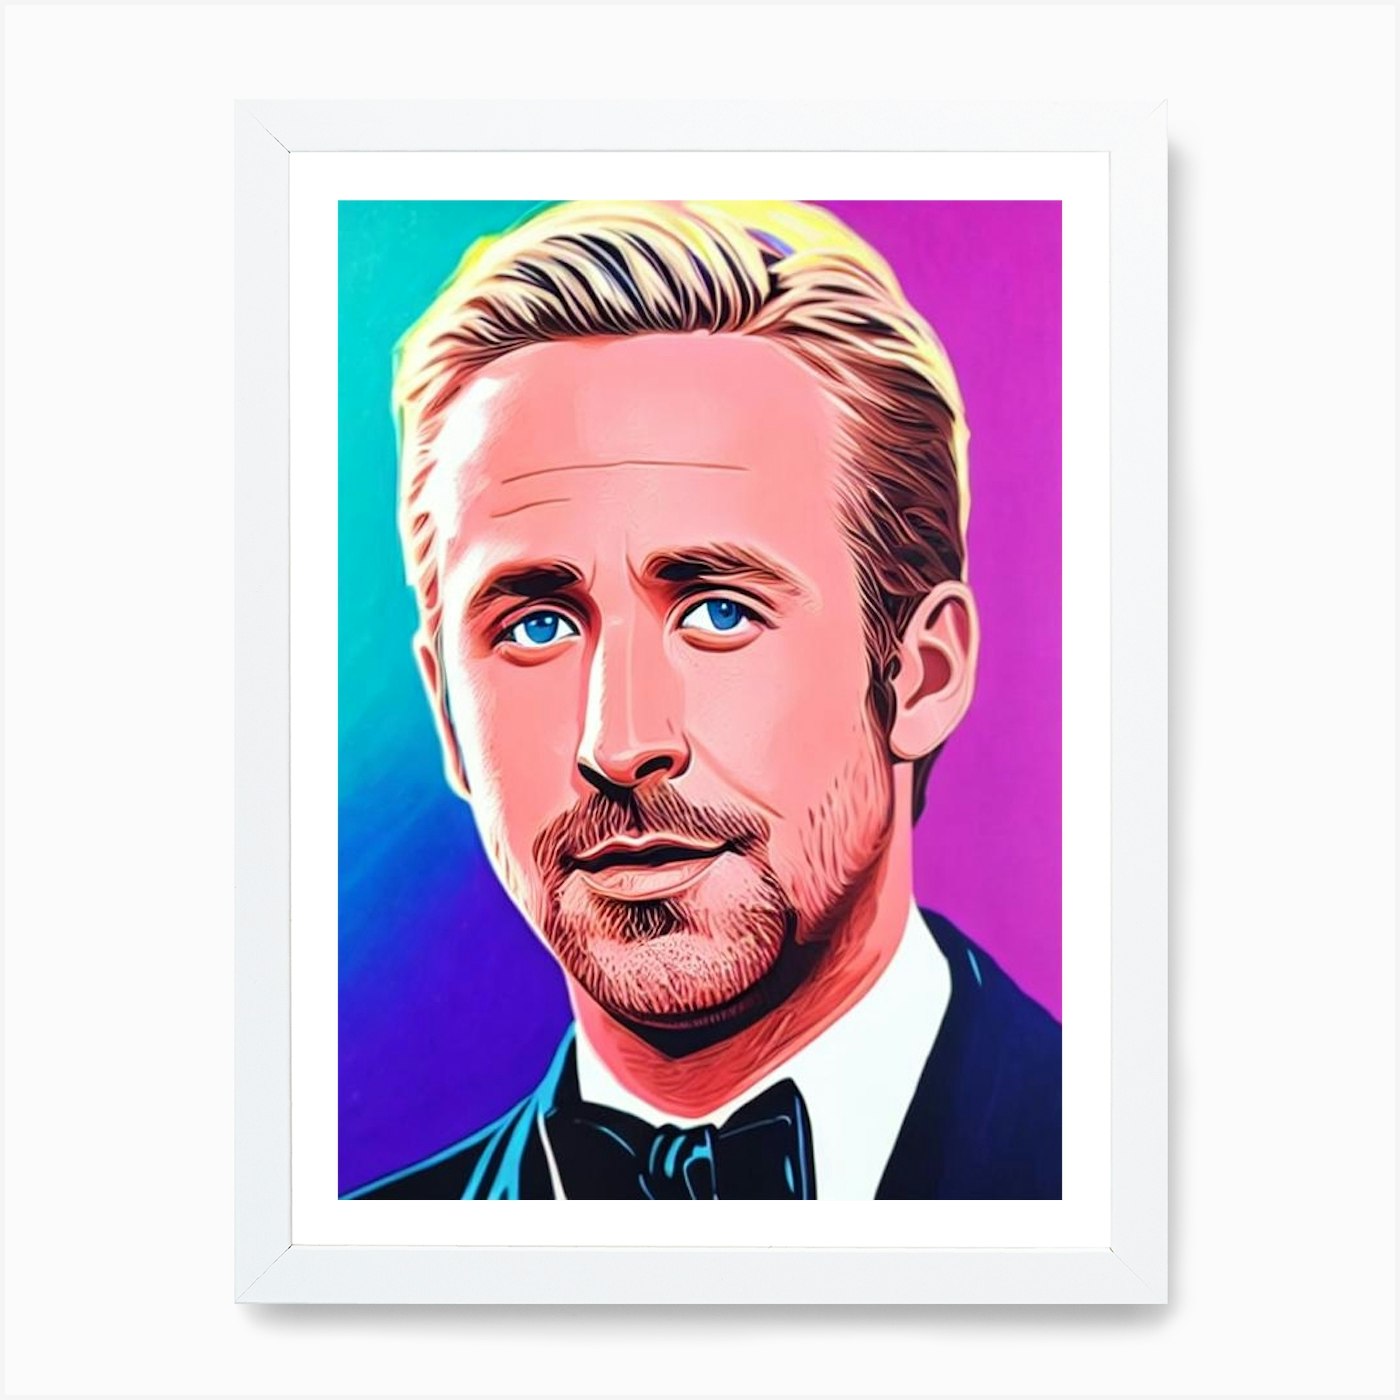  Ryan Reynolds Poster Canvas Prints Wall Art For Home Office  Decorations With Framed 16x12: Posters & Prints